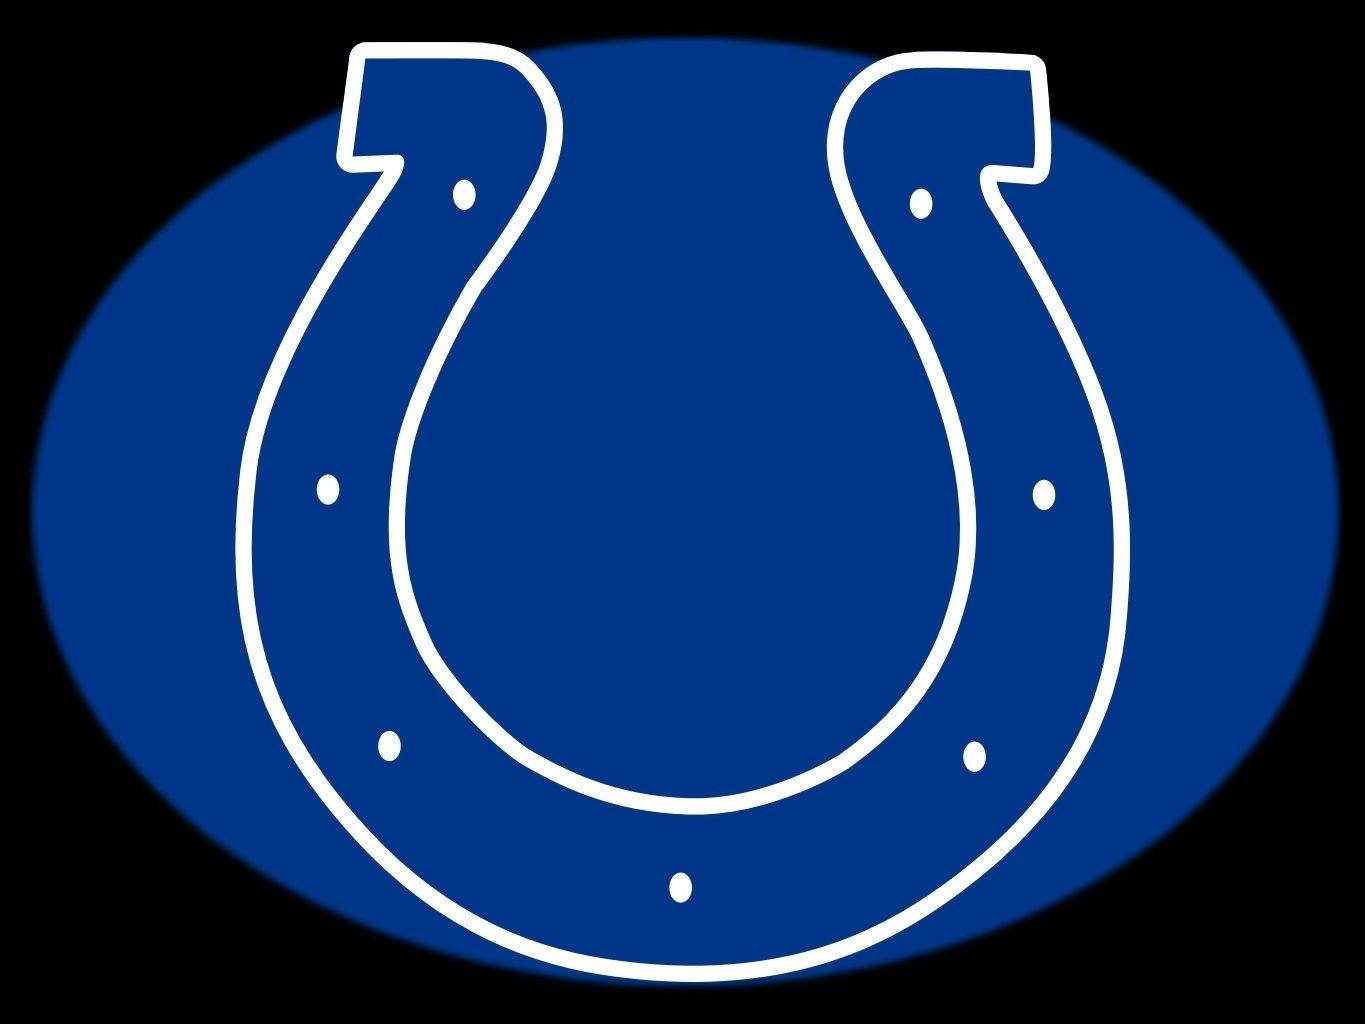 Colts videos, image and buzz